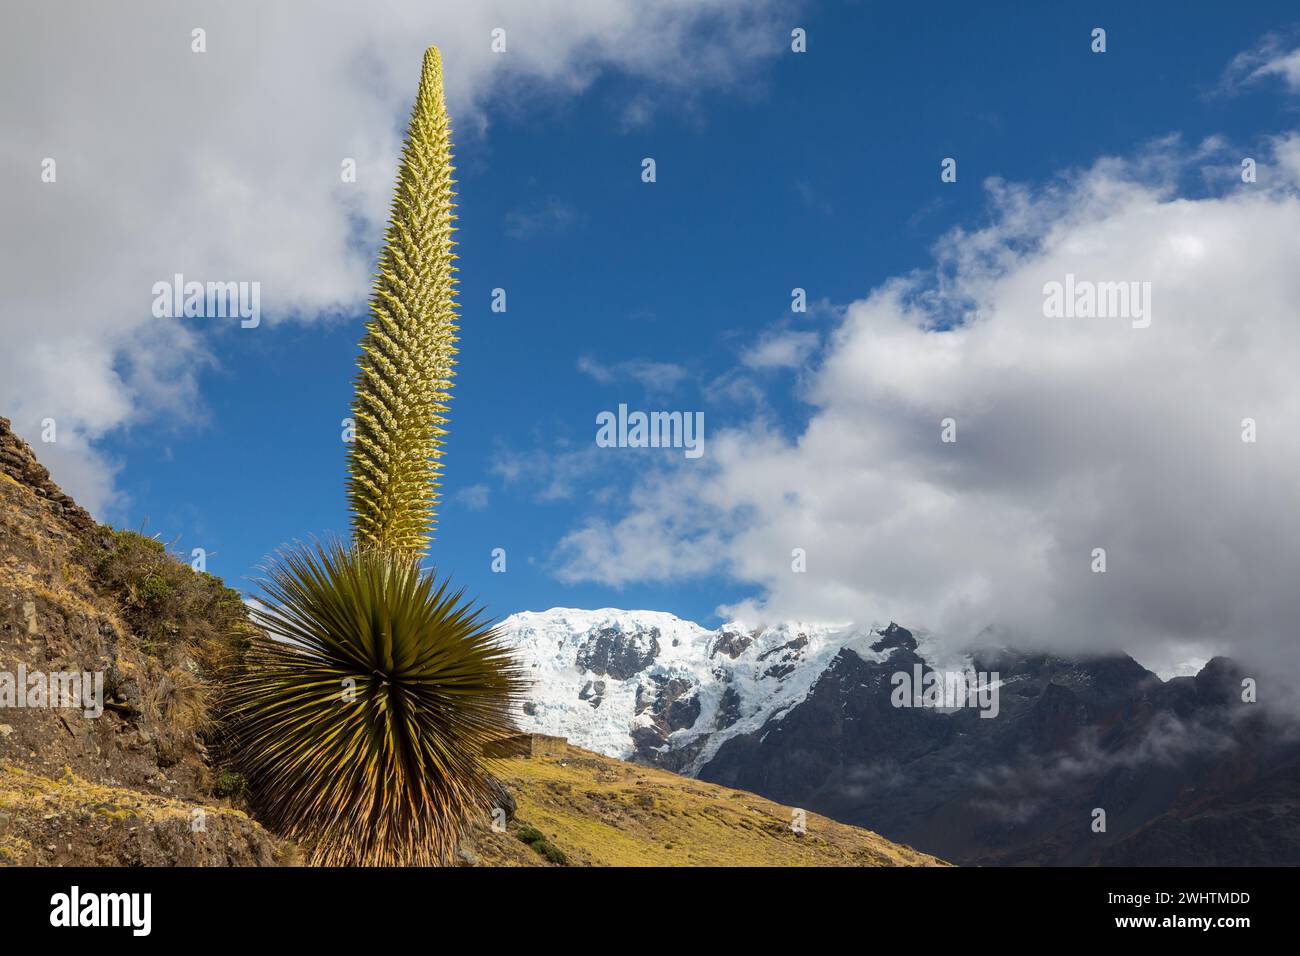 Hiking in the fantastic landscape of the Peruvian high mountain Andes Stock Photo